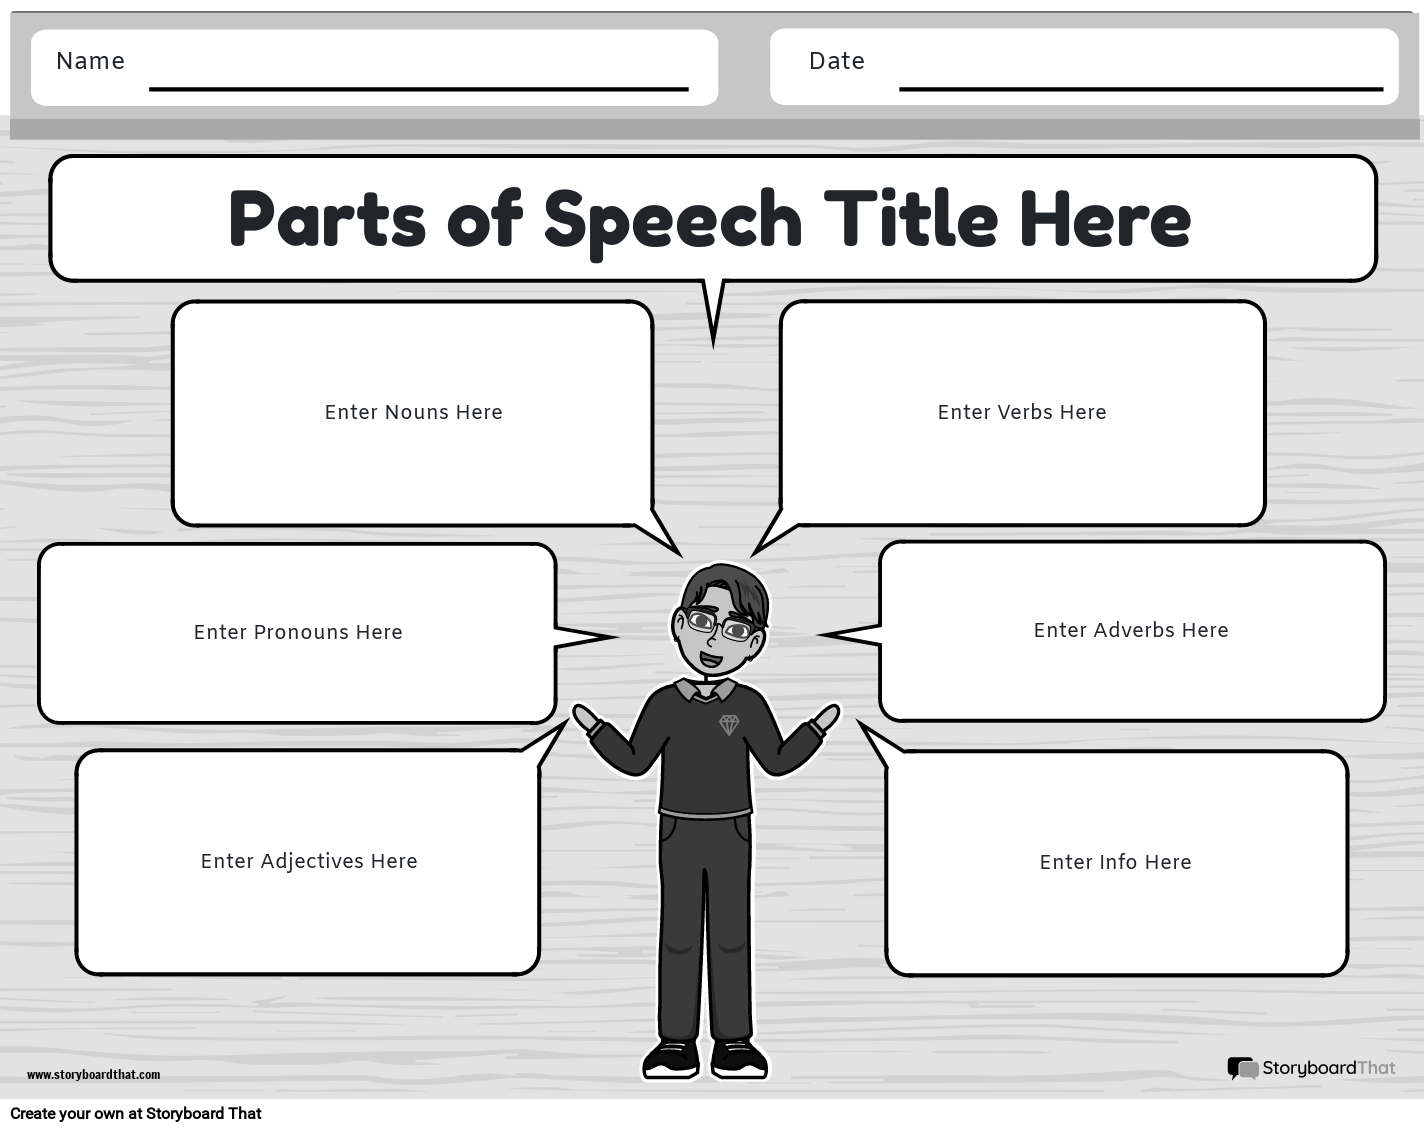 Parts of Speech Worksheet Featuring a Character